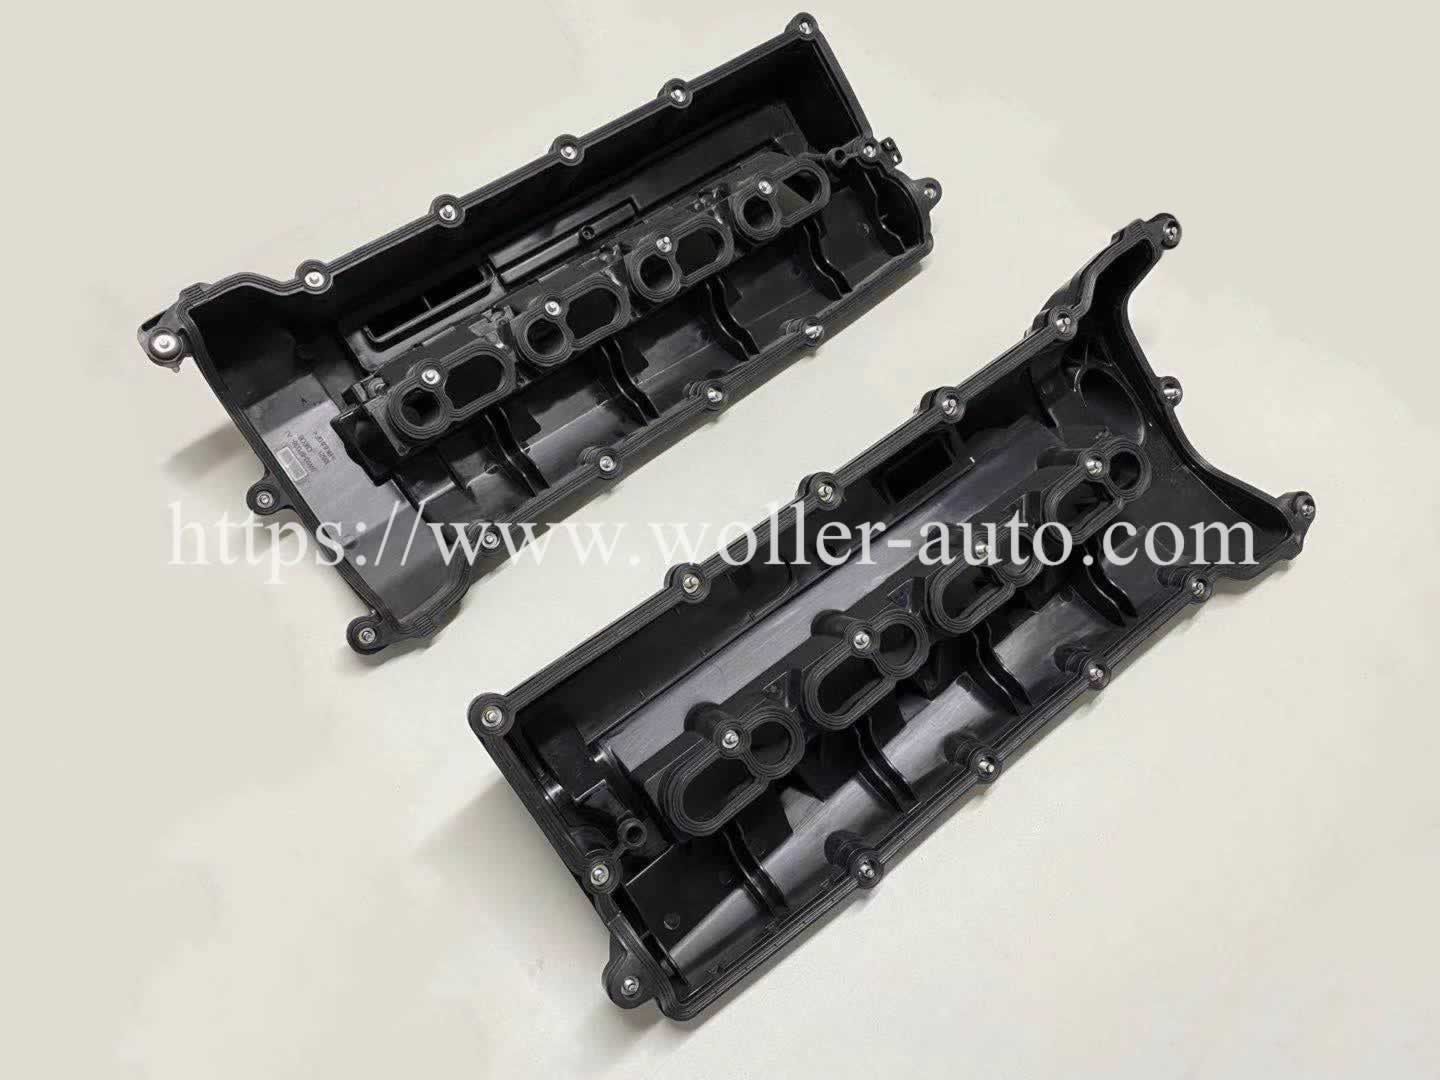 Engine Camshaft Cover OE LR041443 For Land Rover Rang Rover D4 Sport 5.0L V8 Gas